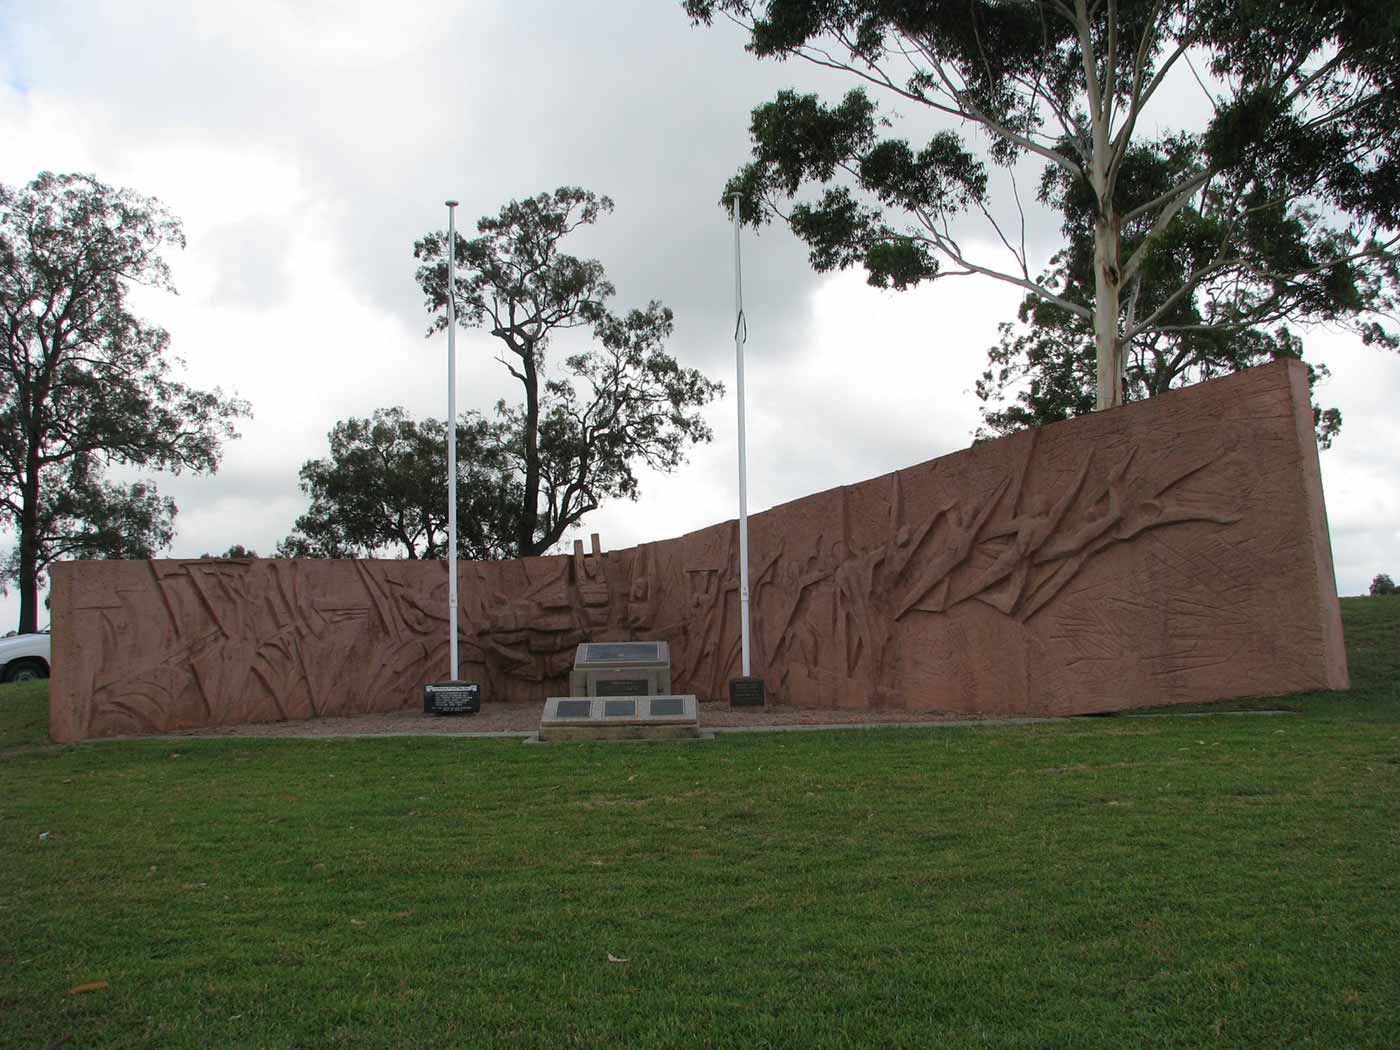 Photograph of a large sculpted memorial in a park